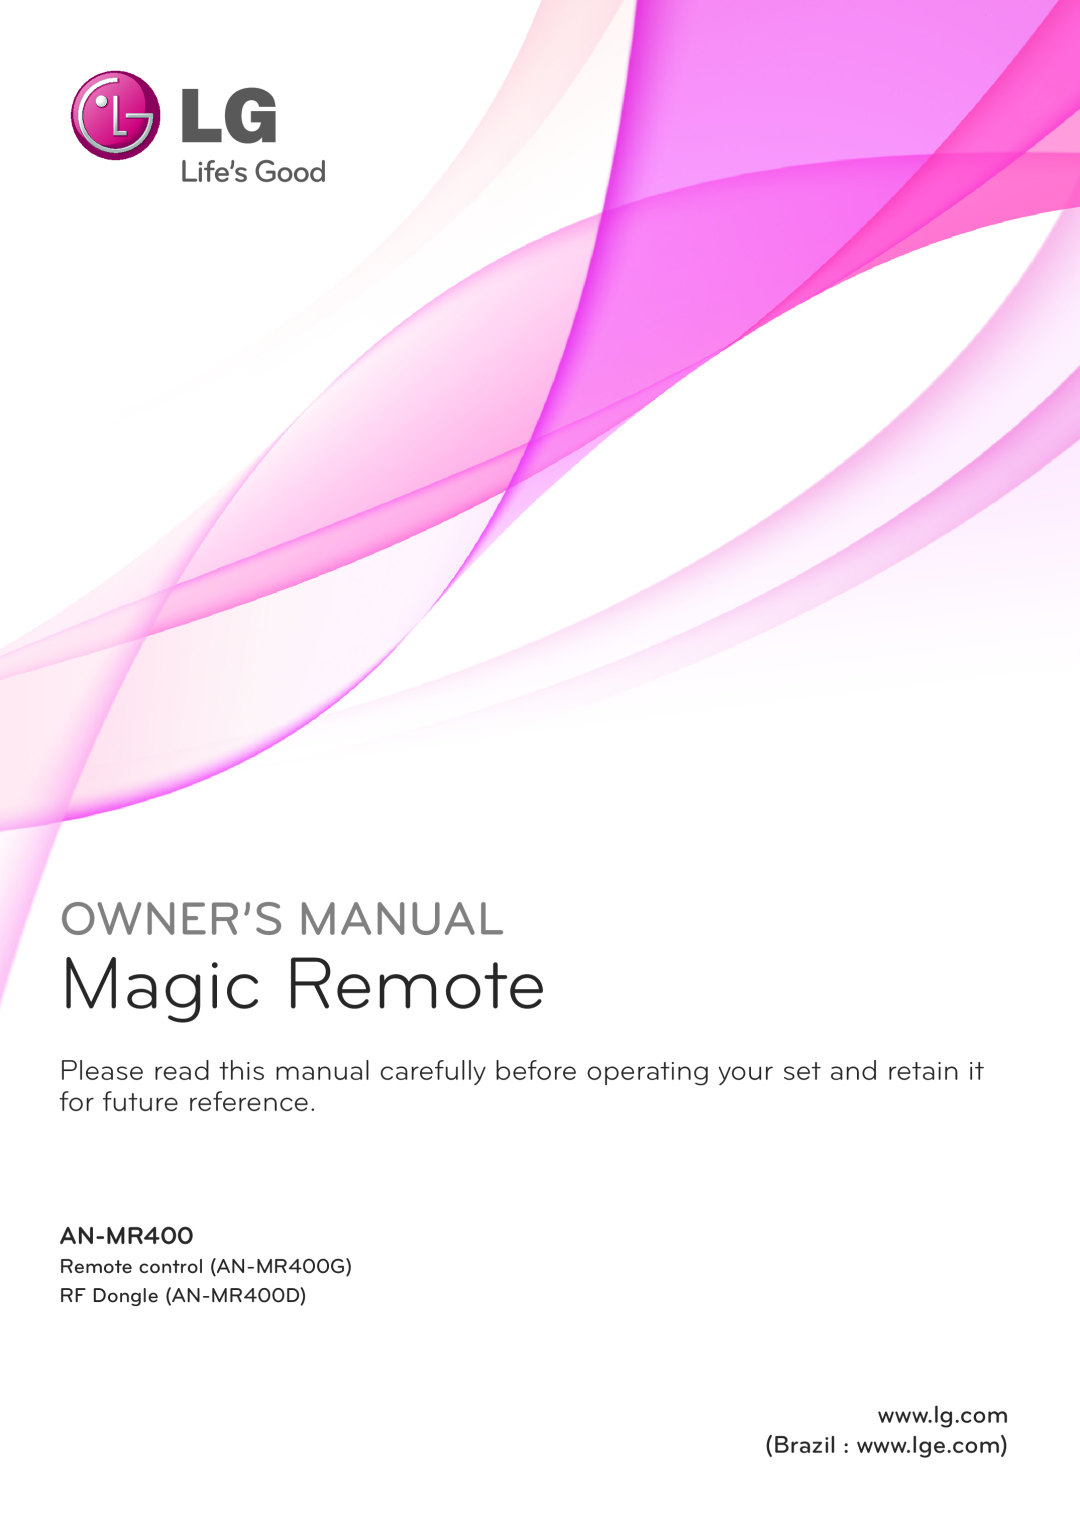 LG Electronics owner manual Magic Remote, Owner’S Manual, Remote control AN-MR400G RF Dongle AN-MR400D 